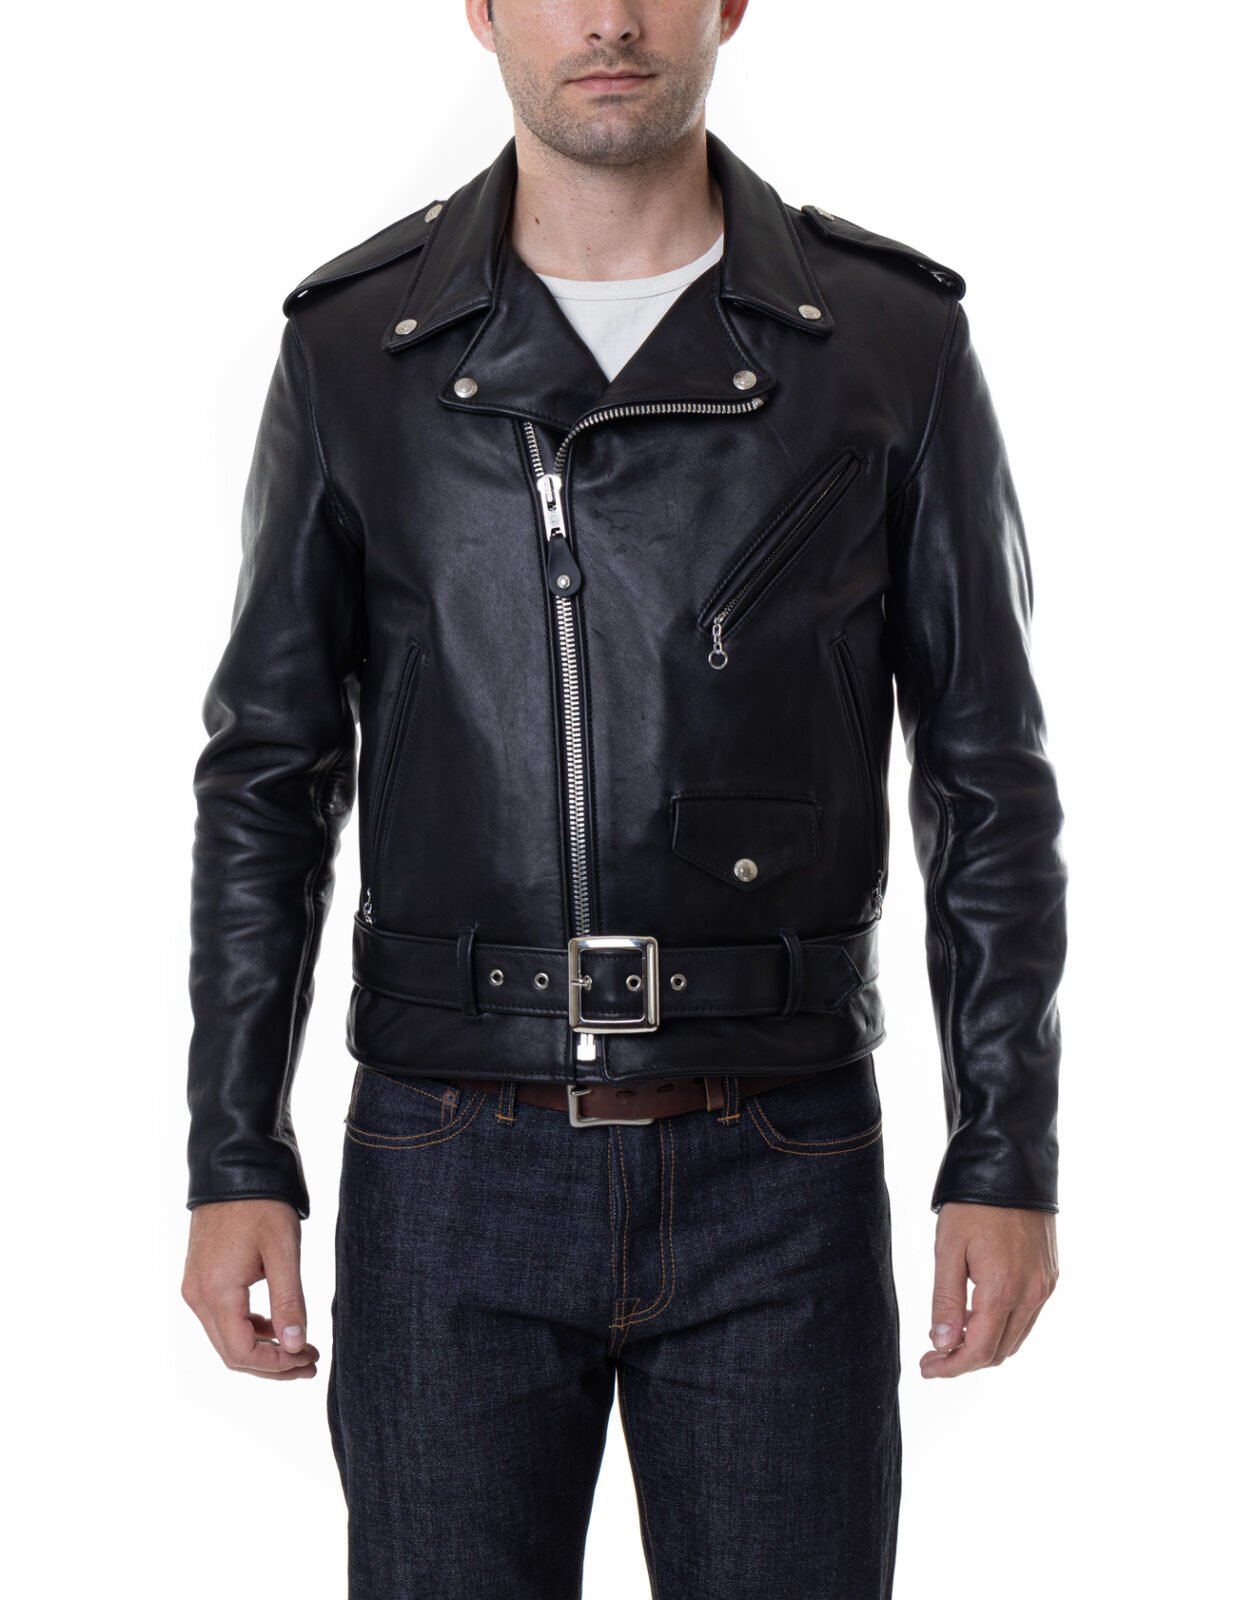 Classic Leather Motorcycle Jacket | Best Quality Genuine Leather ...